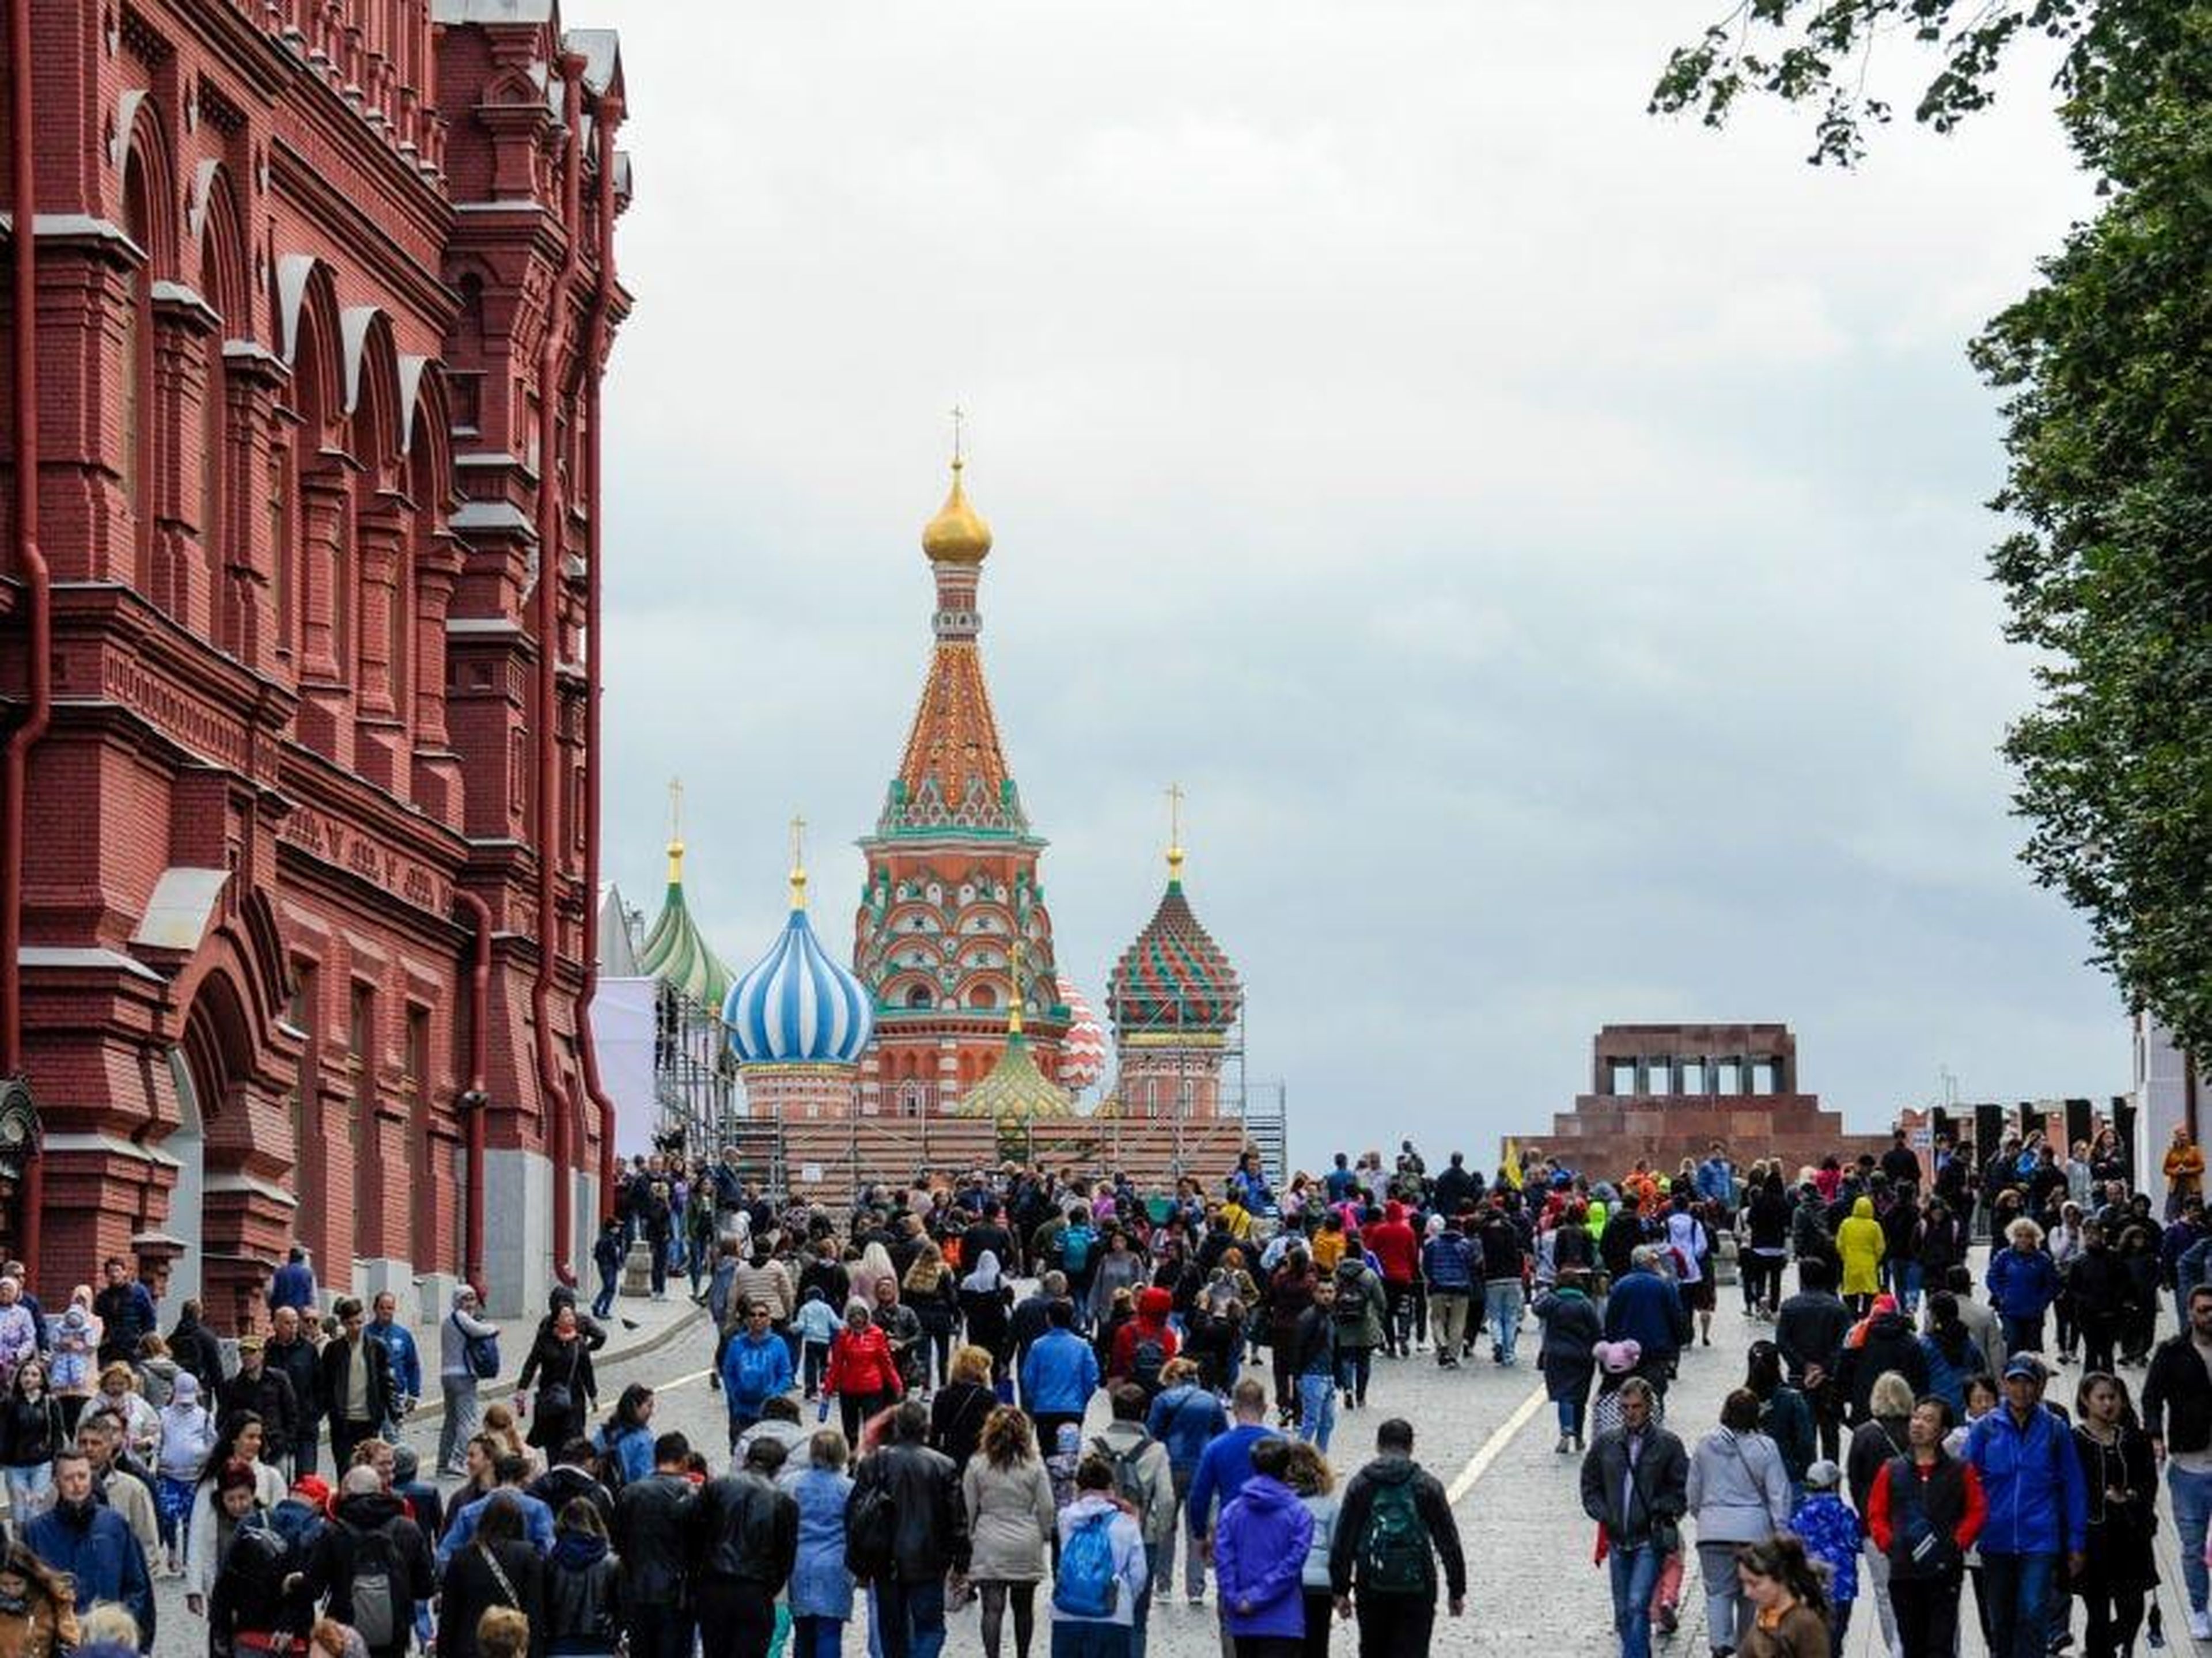 BEFORE: Red Square in Moscow attracts tourists and visitors alike with its colorful Saint Basil's Cathedral.